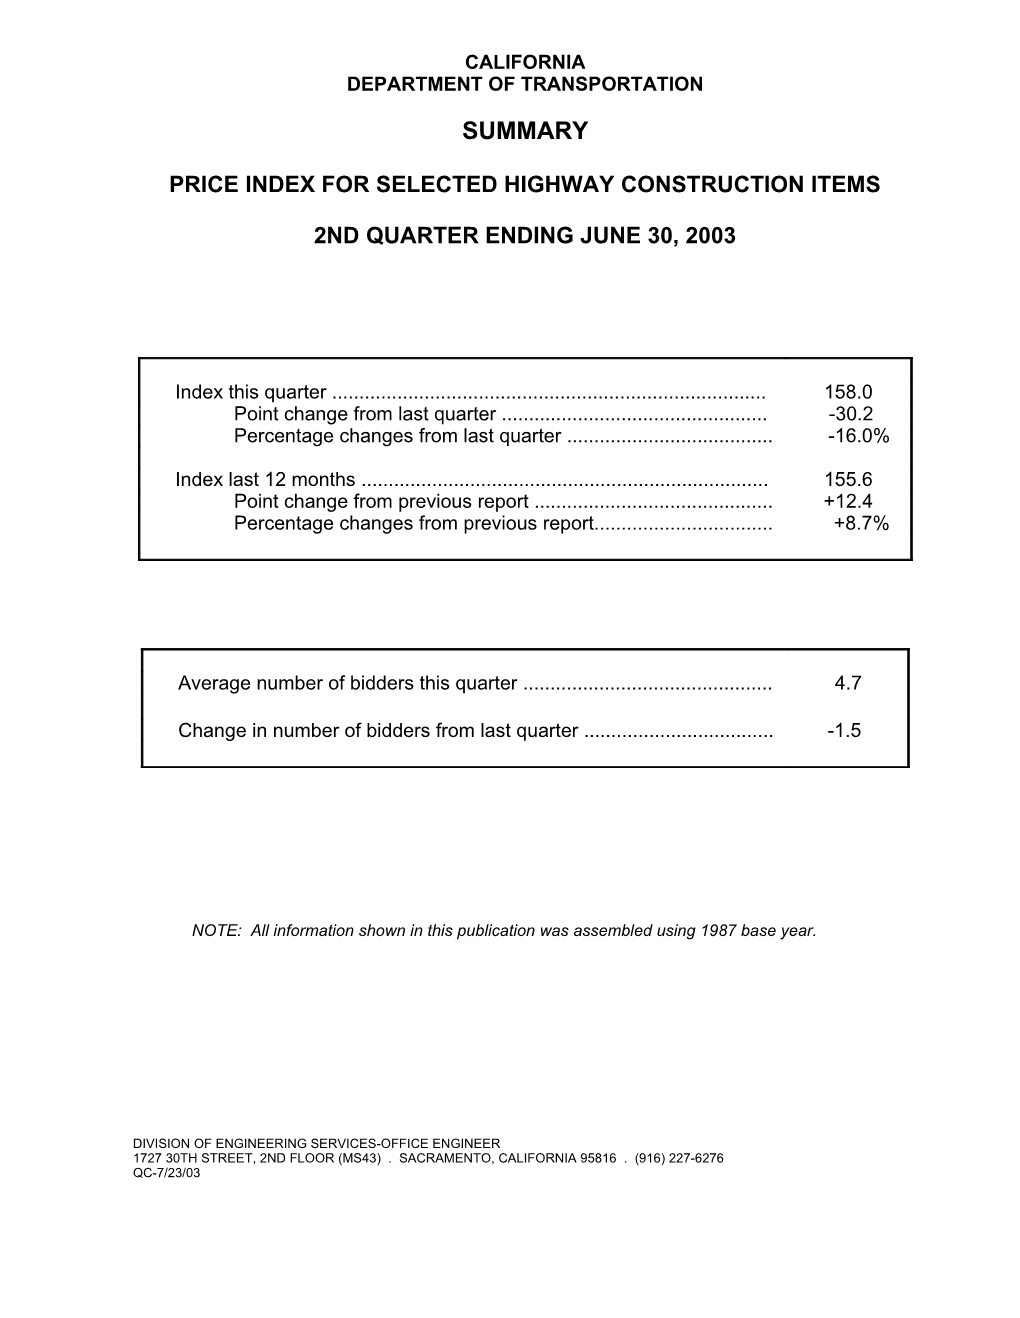 Price Index for Selected Highway Construction Items